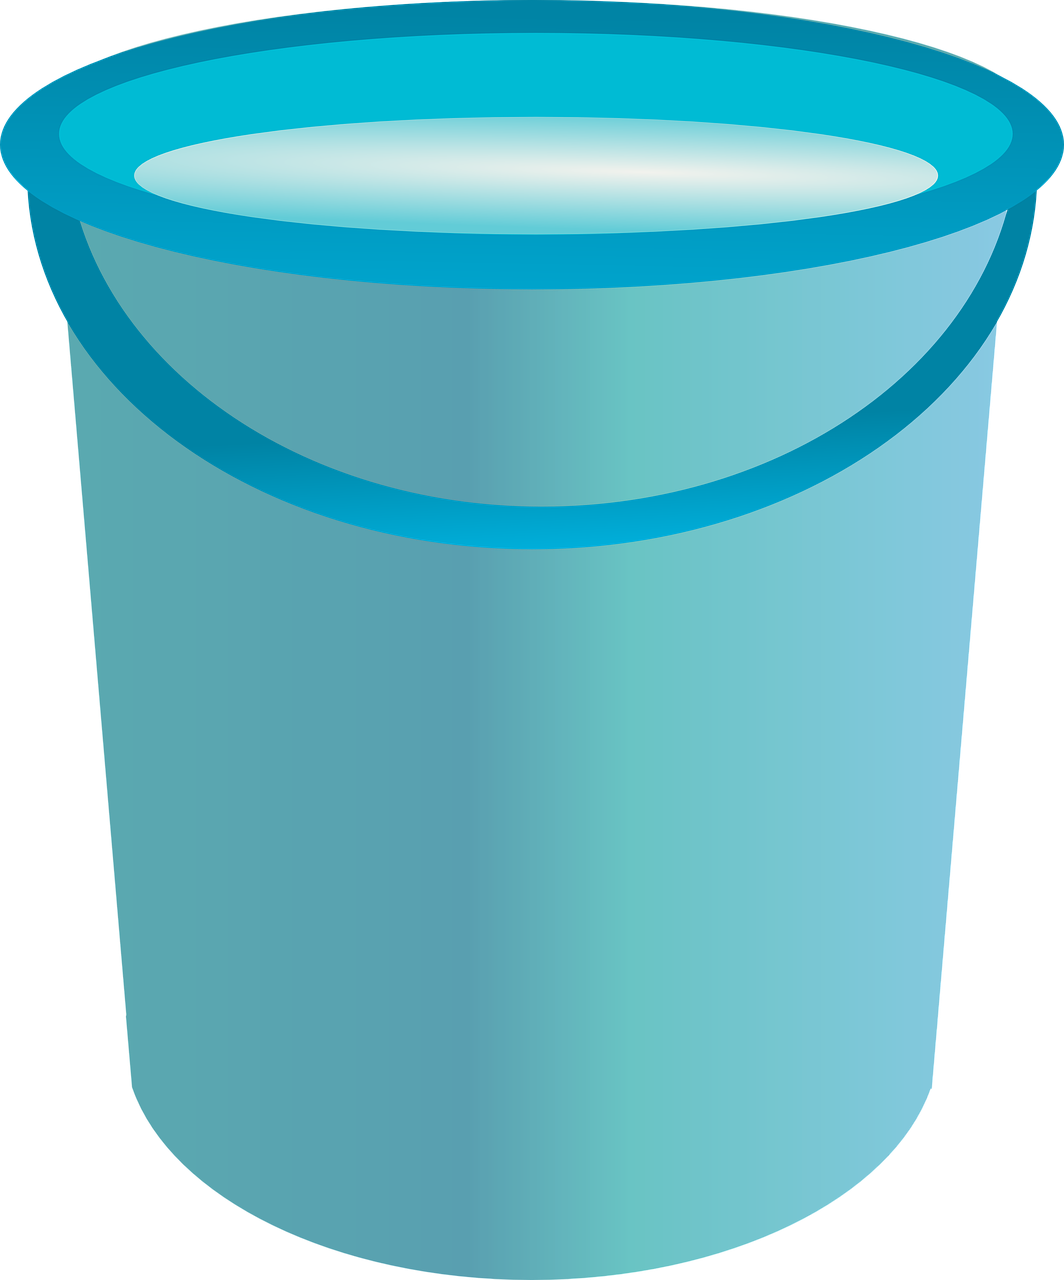 Download free photo of Blue bucket,tool,container,housework,free ...